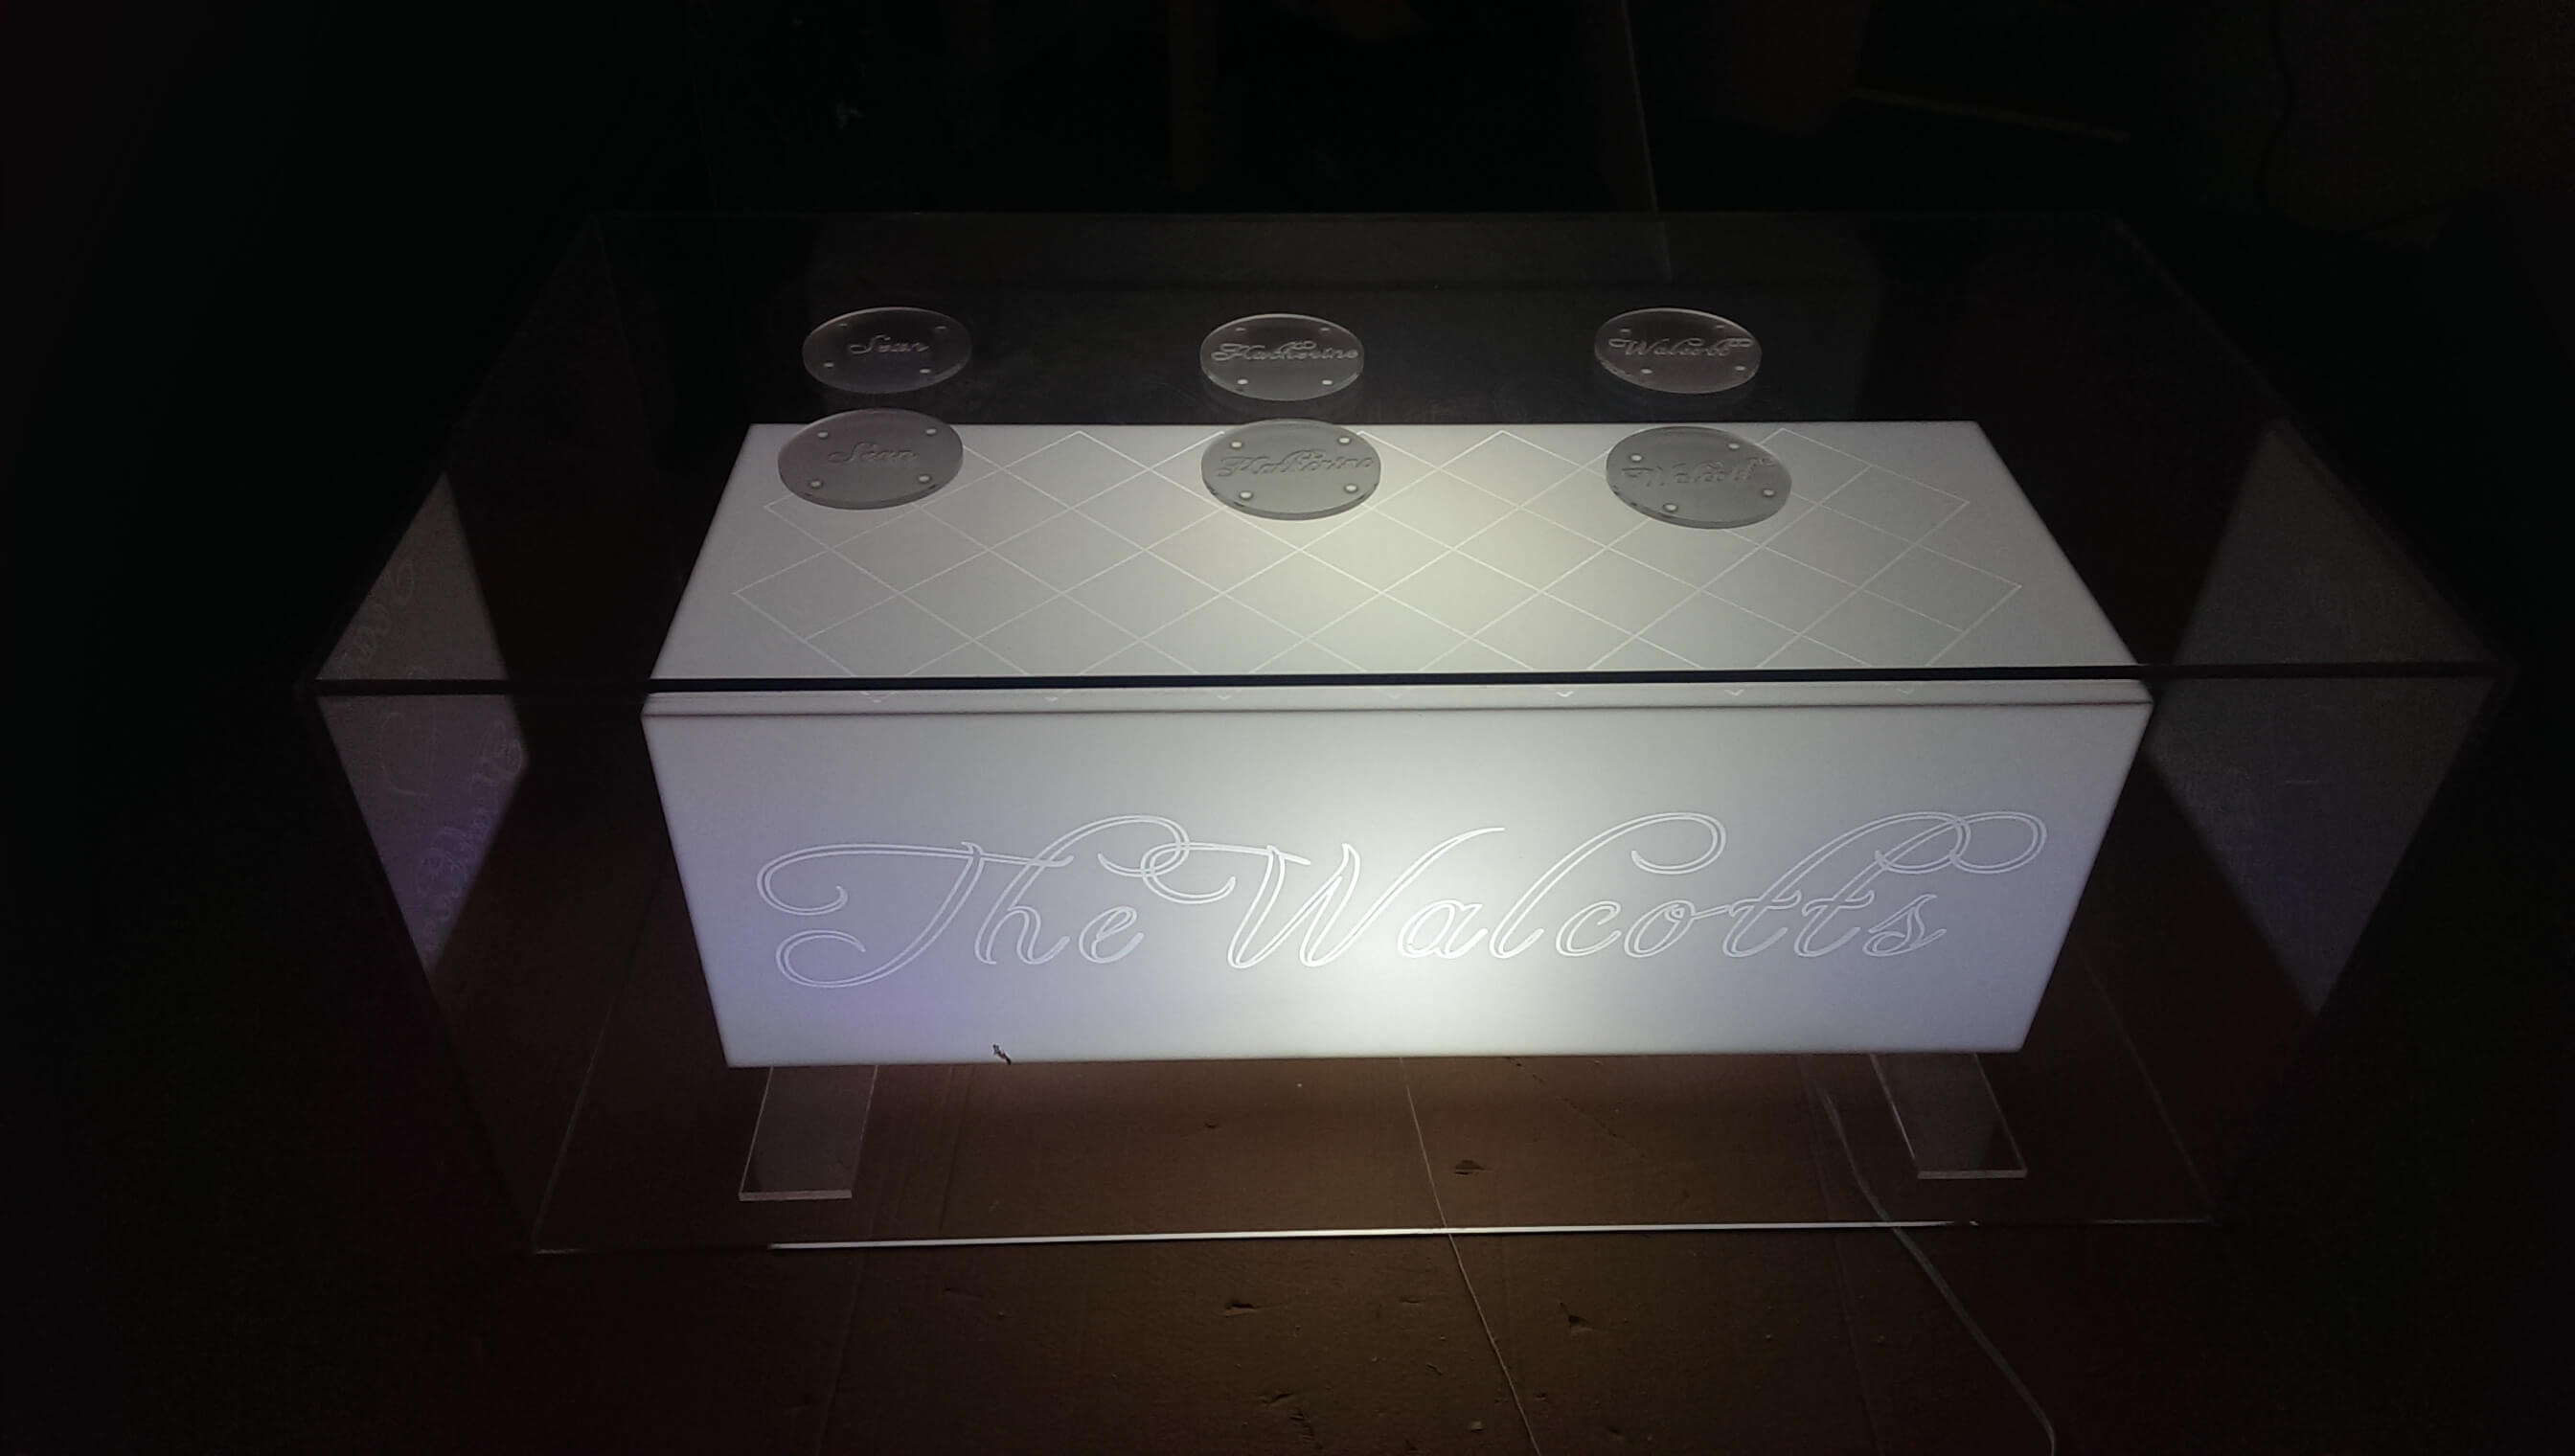 Acrylic center table with engraved letters and lighting effects